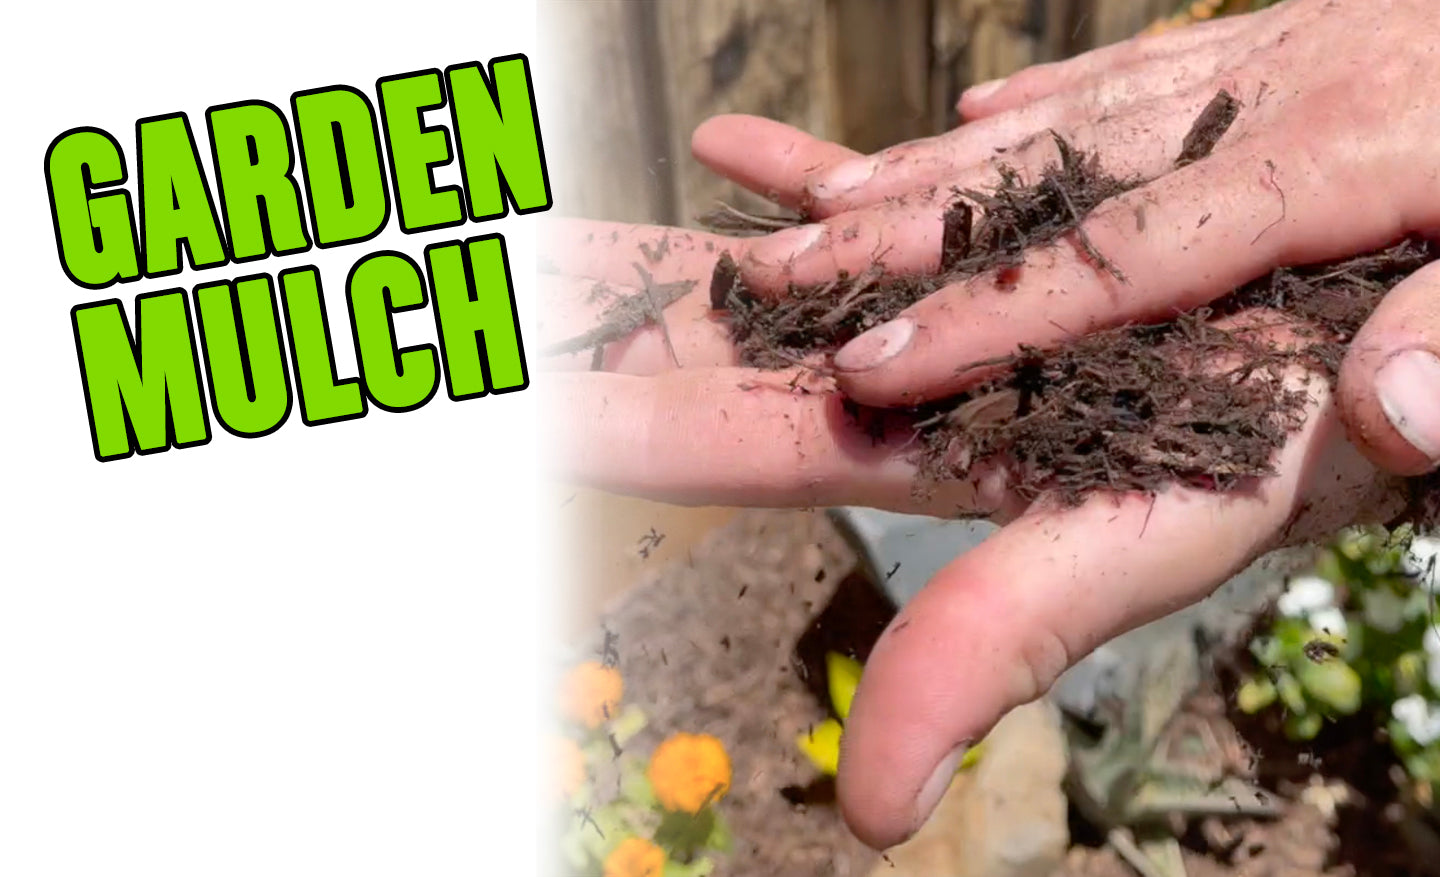 HOW TO REMOVE: Garden Mulch Stain